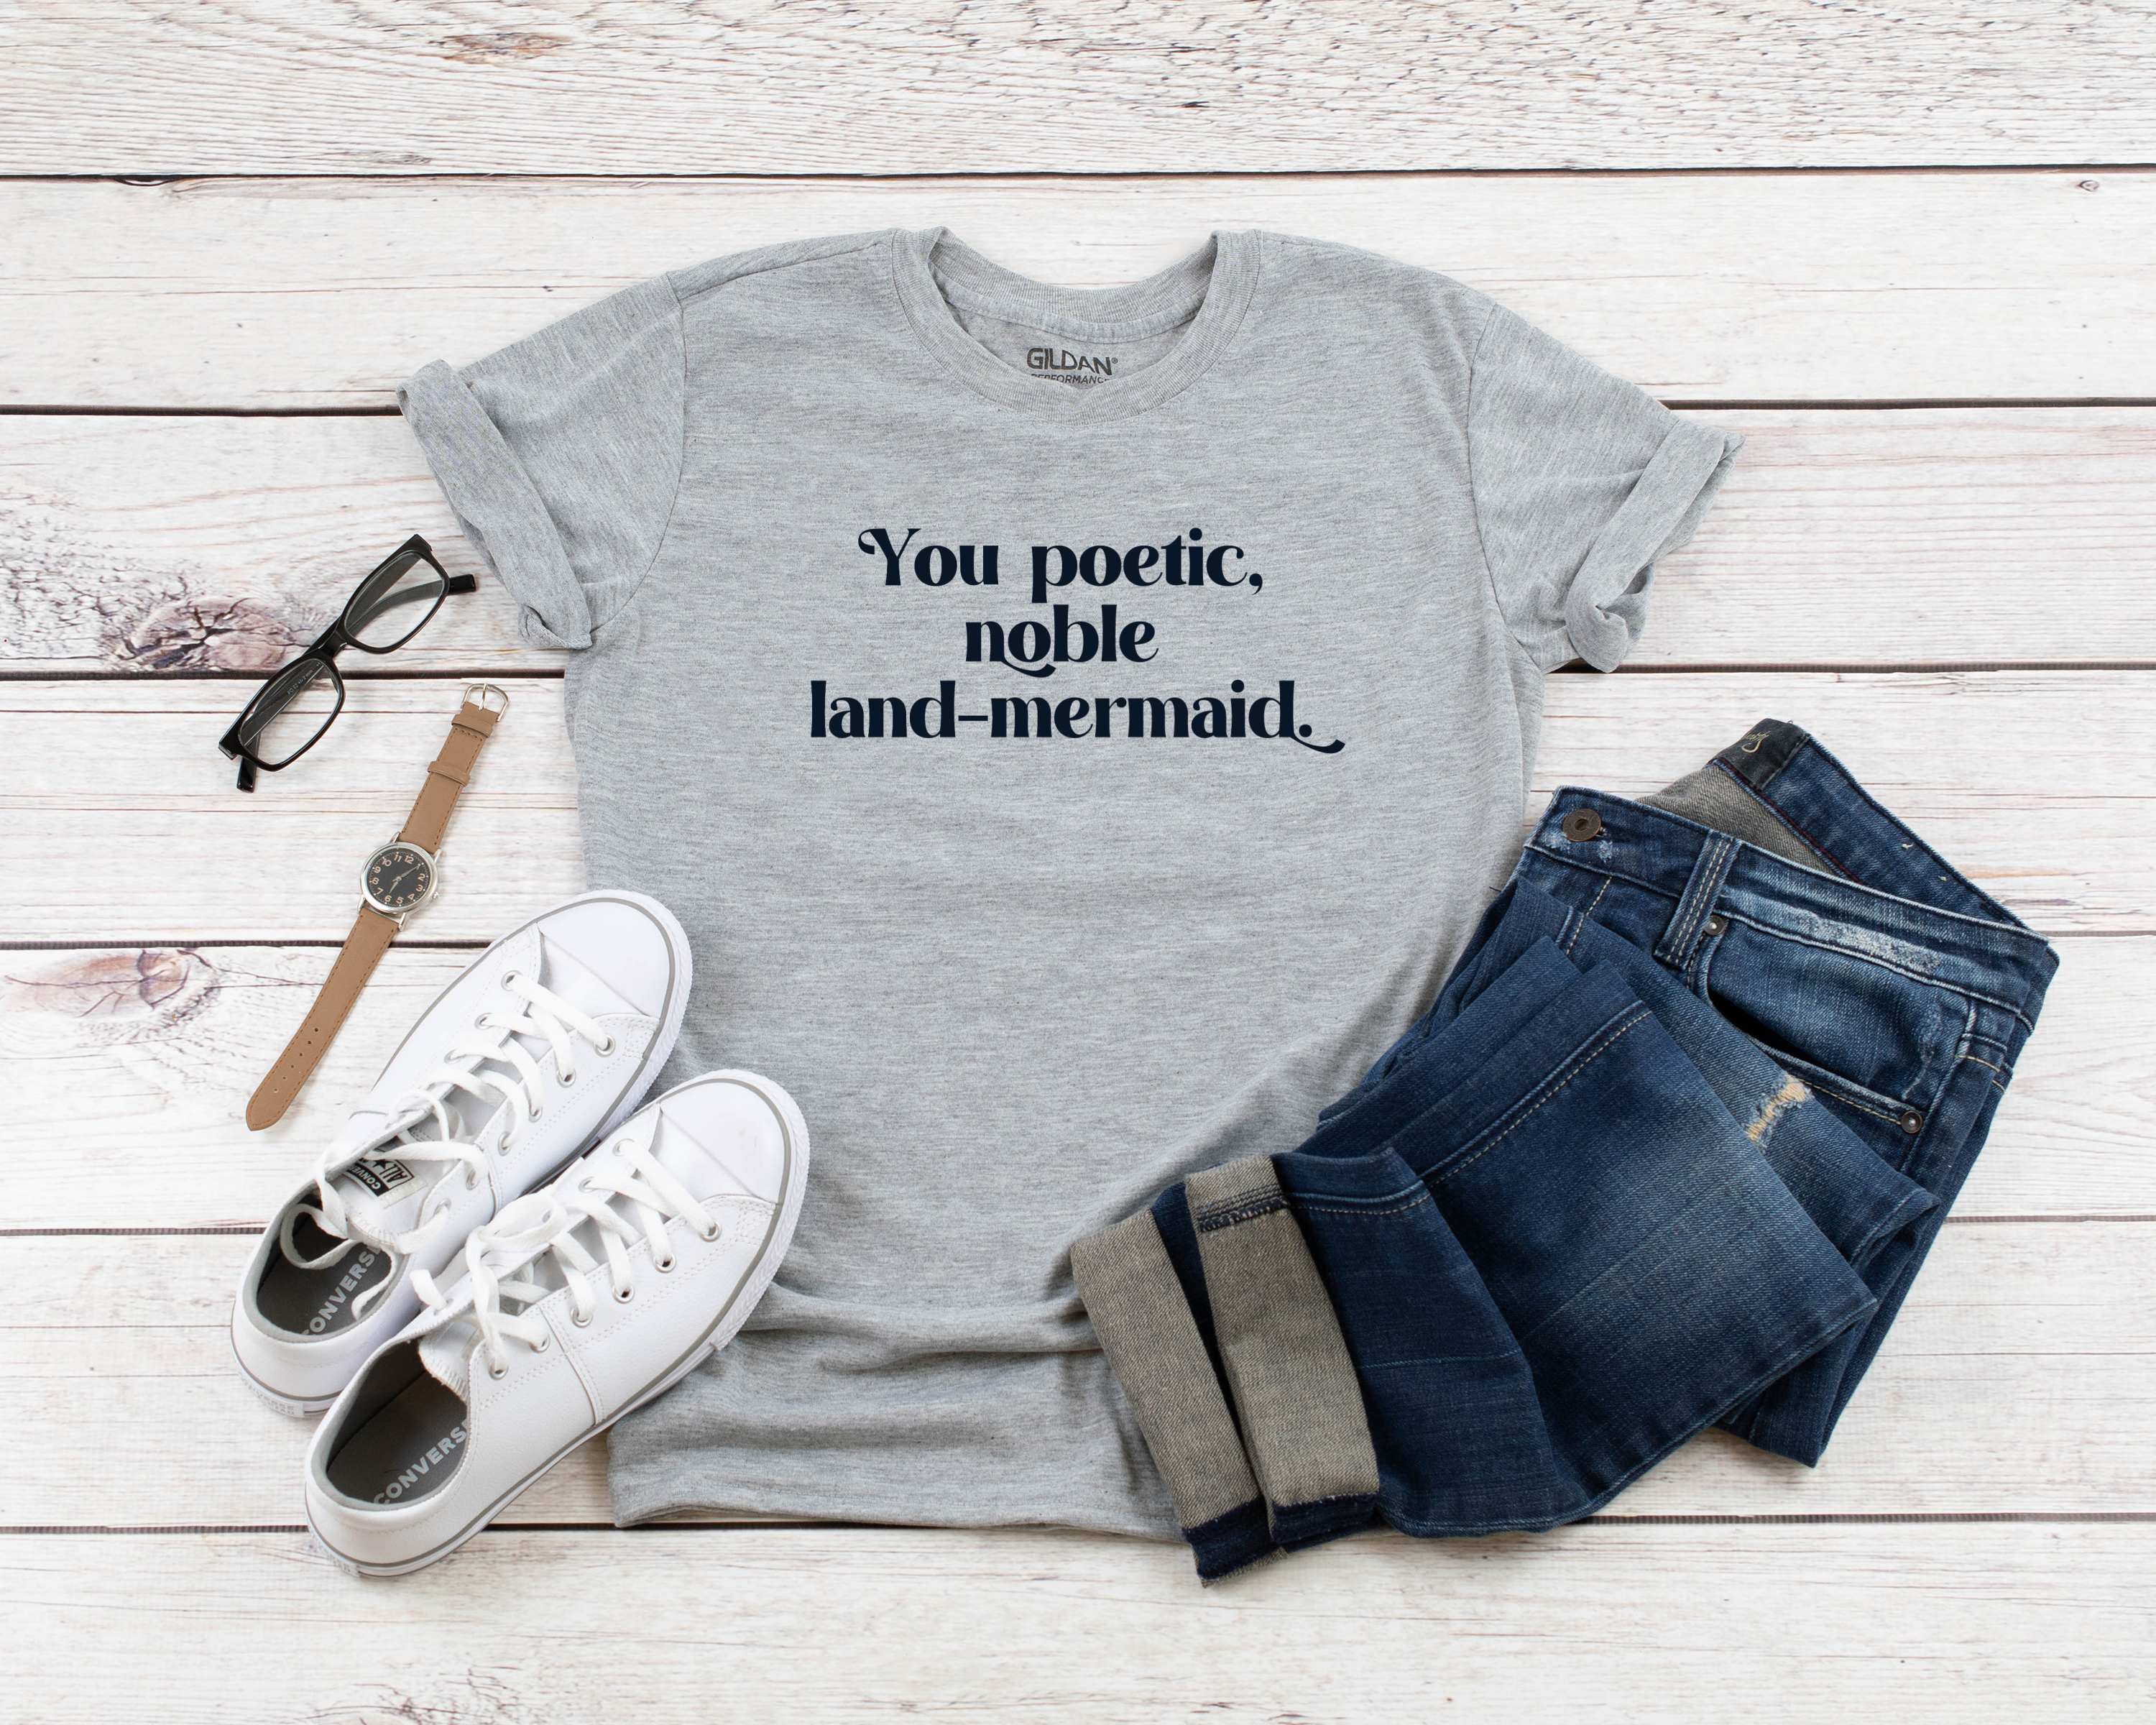 grey t-shirt that reads You poetic, noble land mermaid sits near white shoes and blue jeans